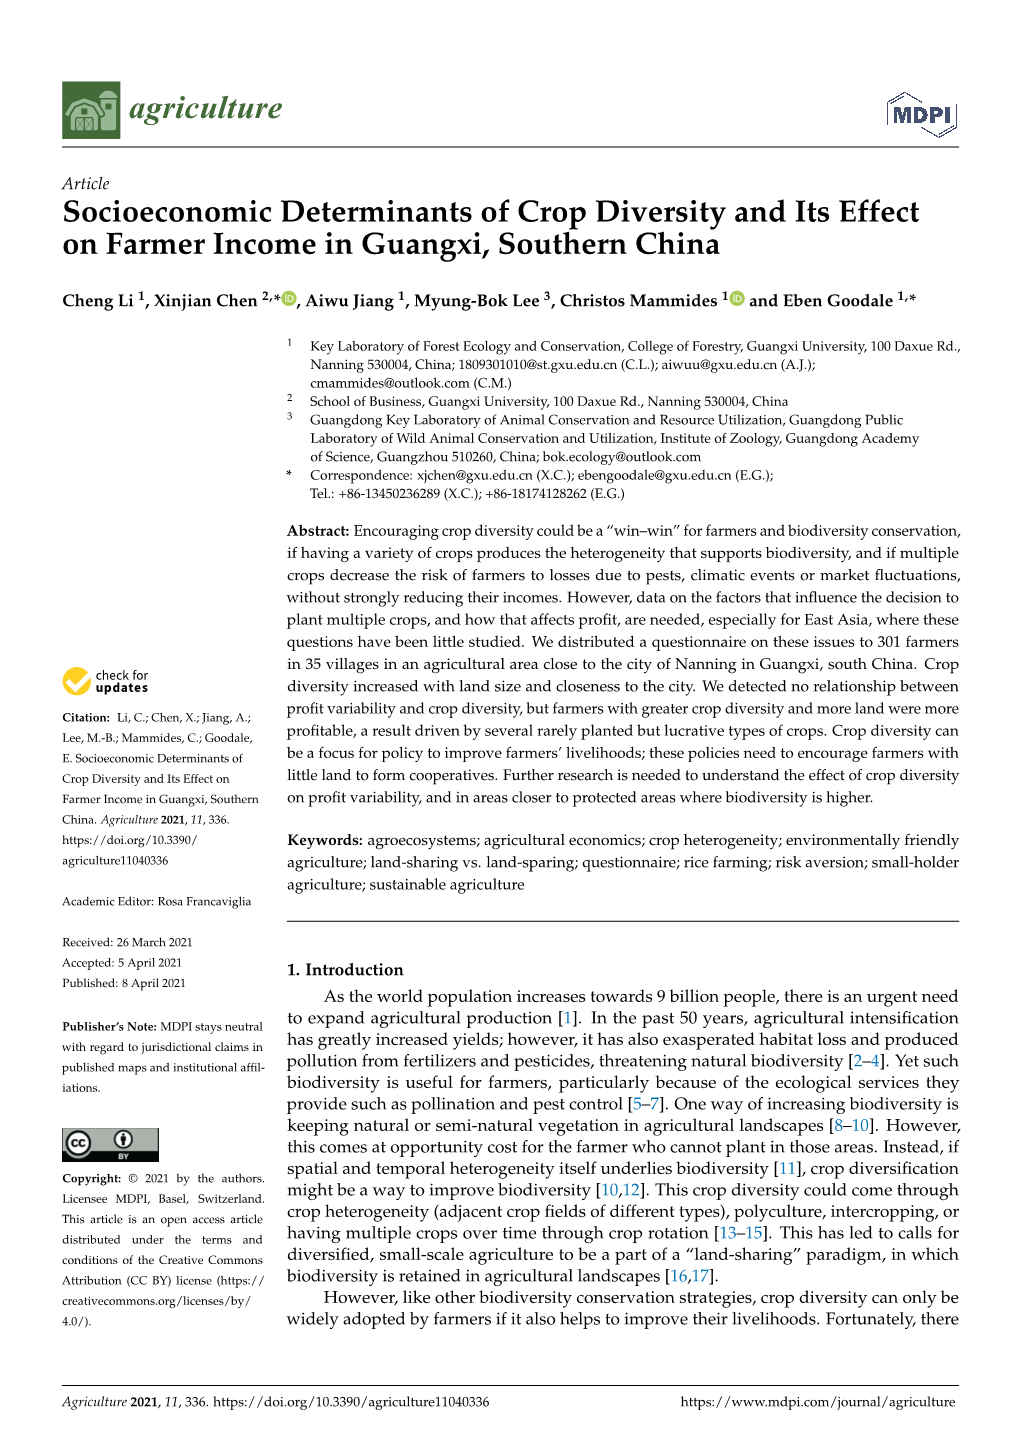 Socioeconomic Determinants of Crop Diversity and Its Effect on Farmer Income in Guangxi, Southern China